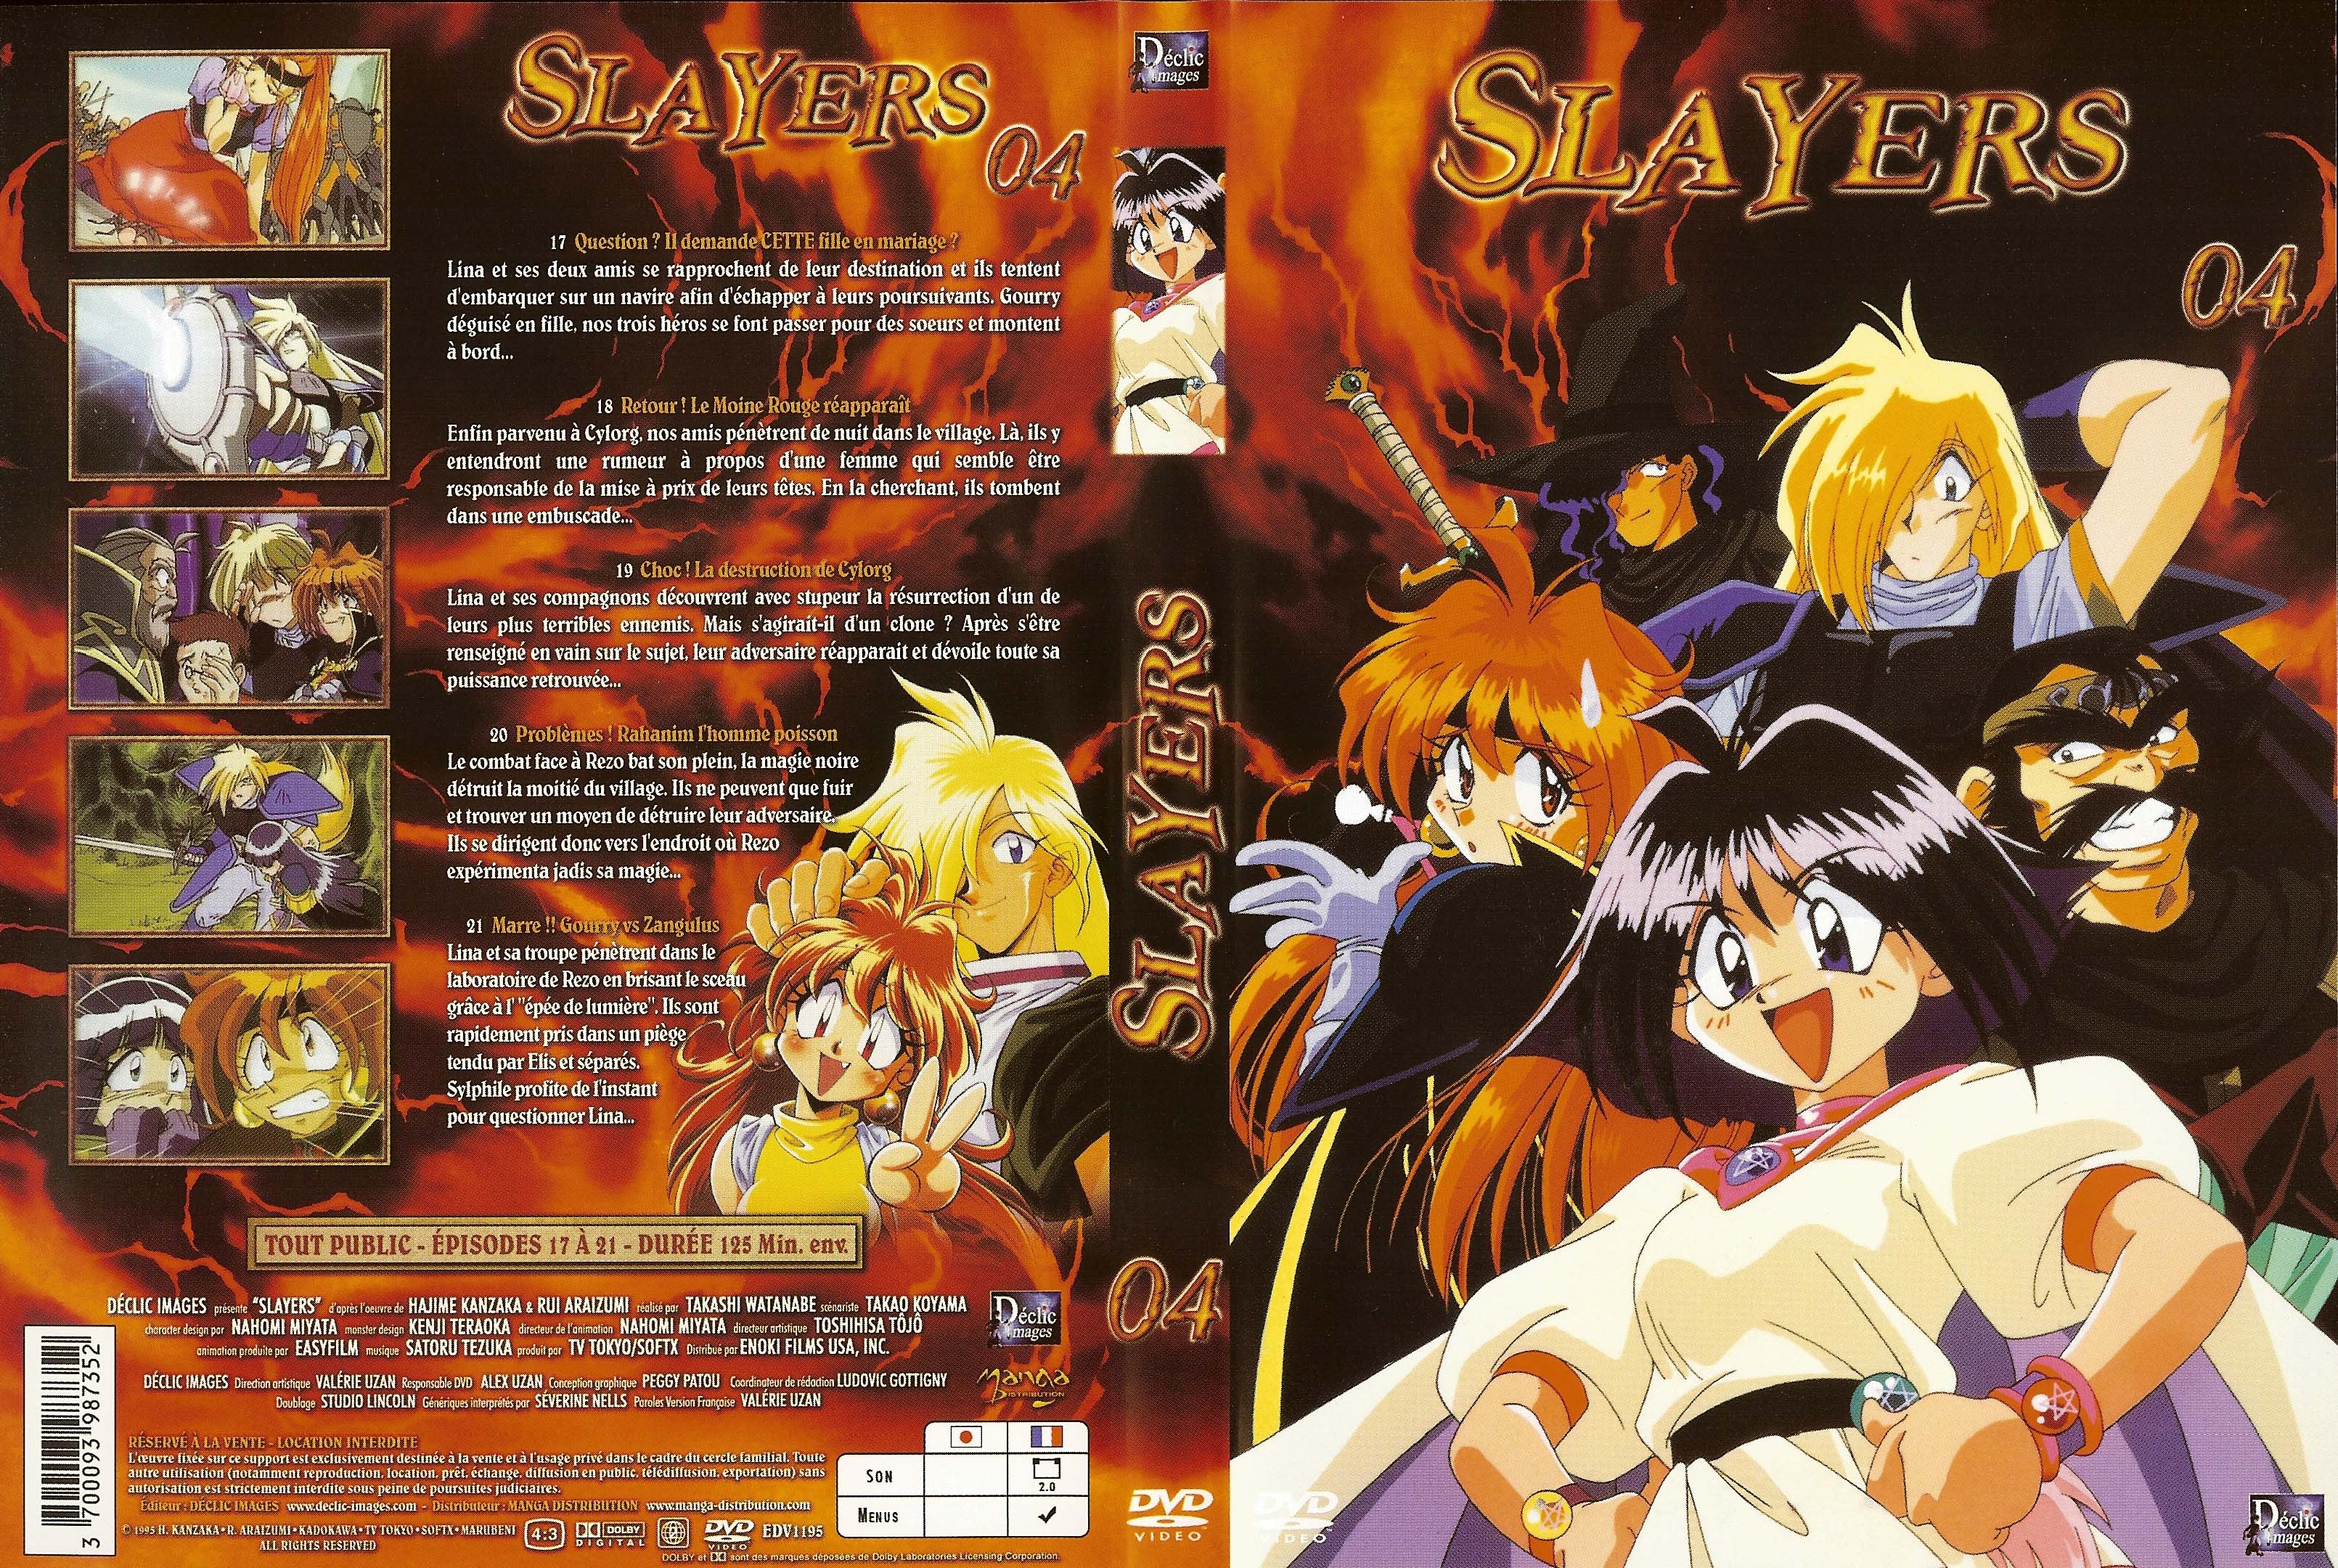 Jaquette DVD Slayers DVD 4